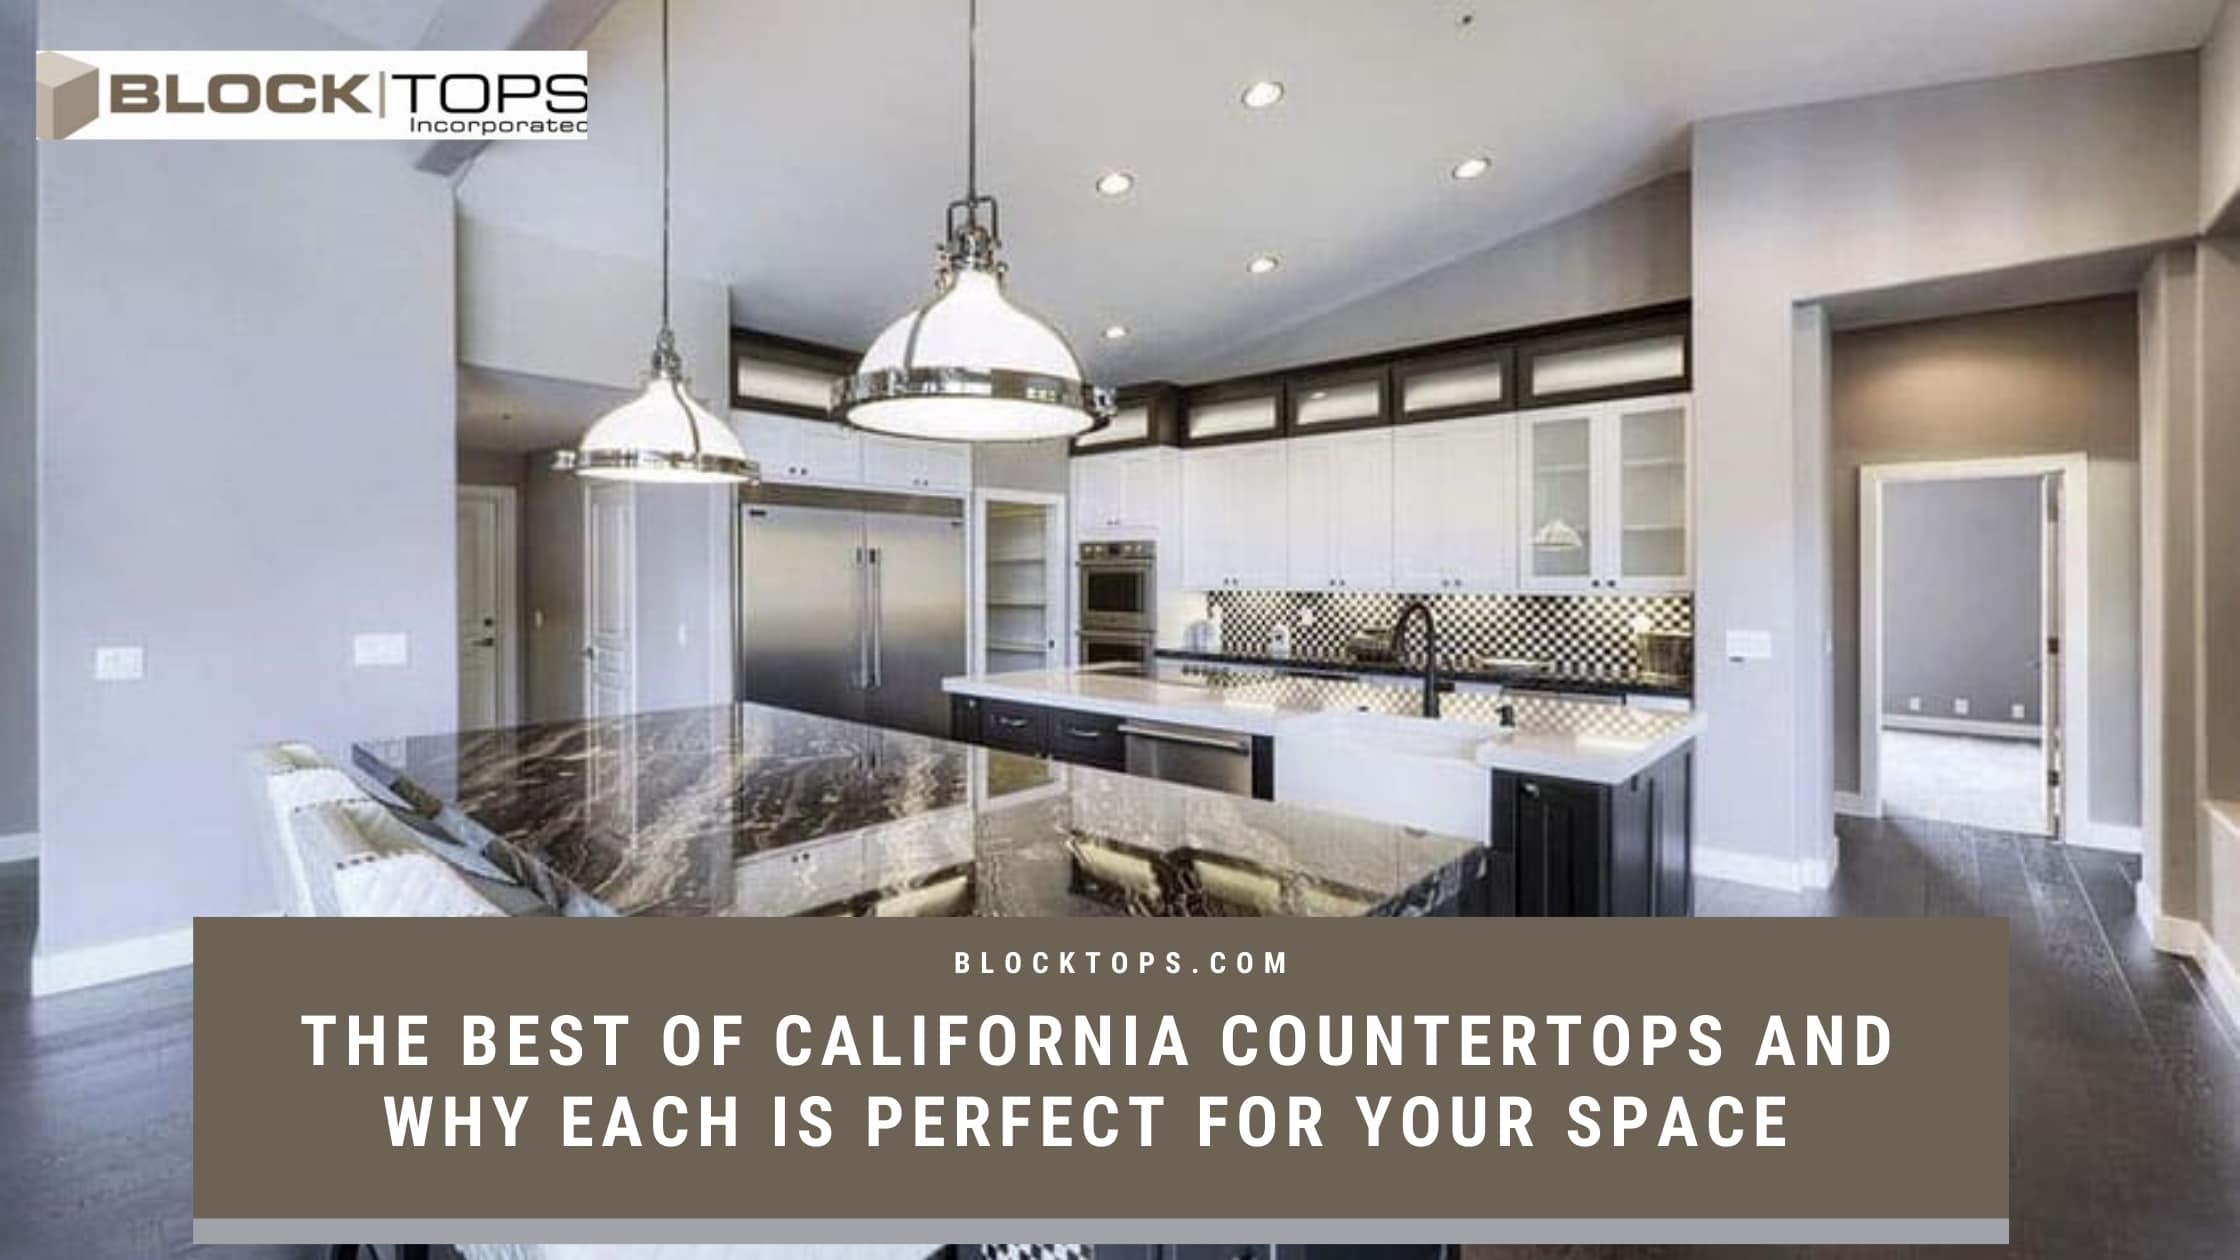 The Best Of California Countertops and Why Each is Perfect for your Space